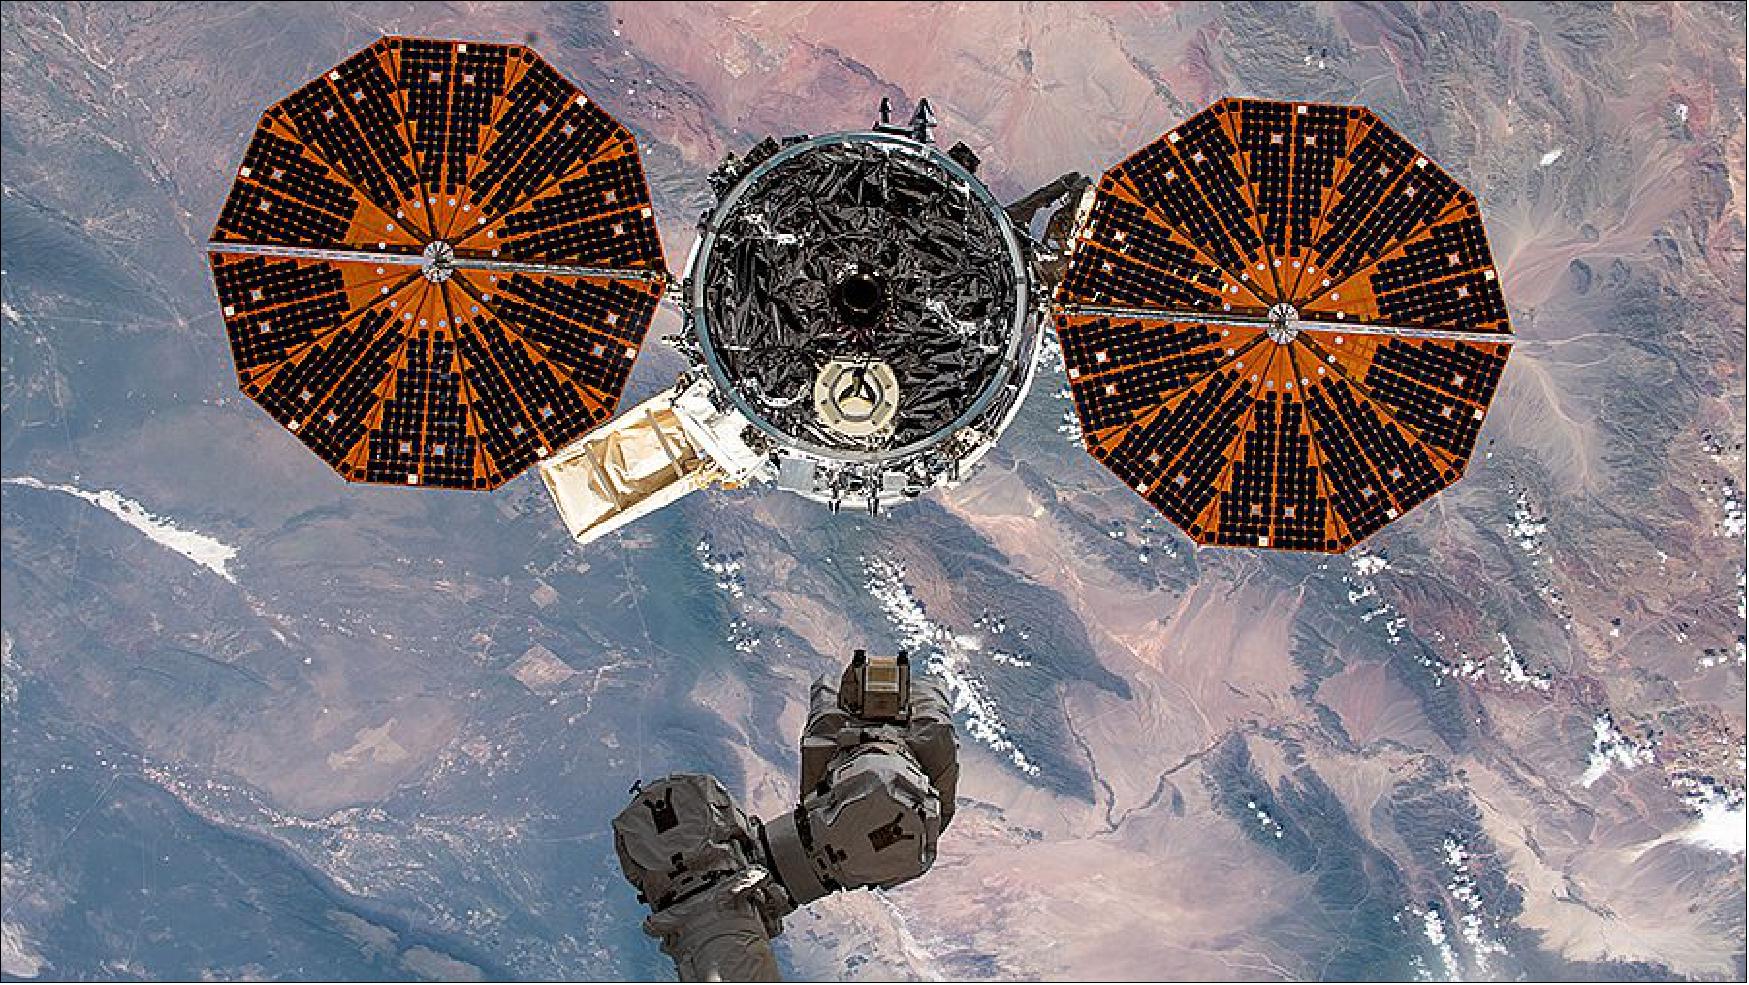 Figure 10: The S.S. Kalpana Chawla begins the second phase of its mission after leaving the International Space Station (image credit: NASA TV)